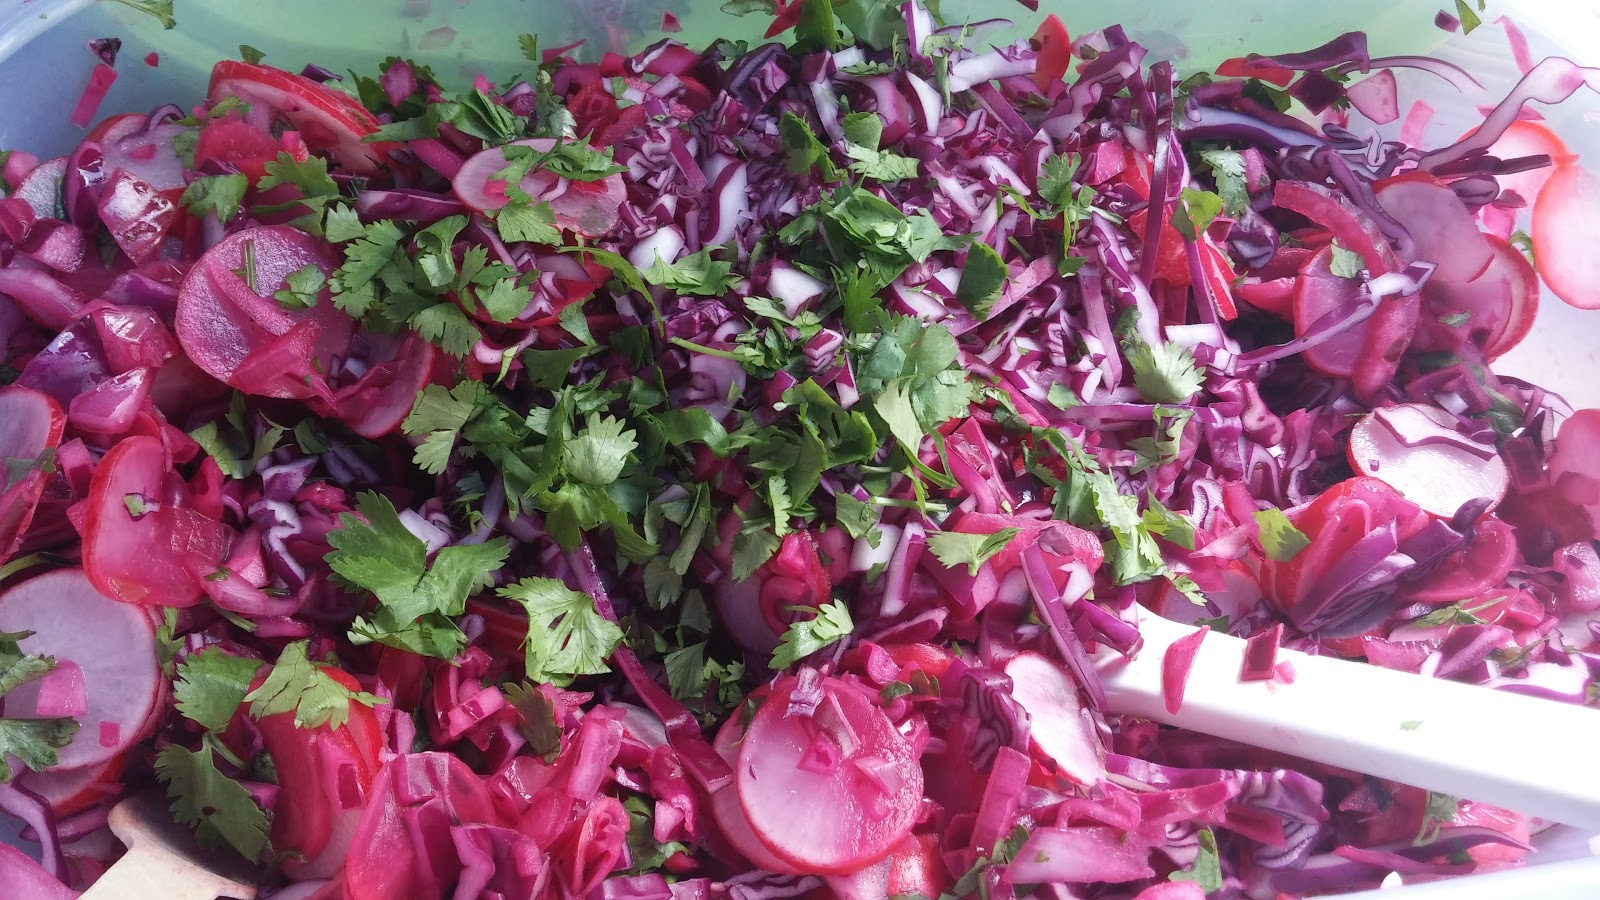 Radishes, Red Cabbage, Red Onion